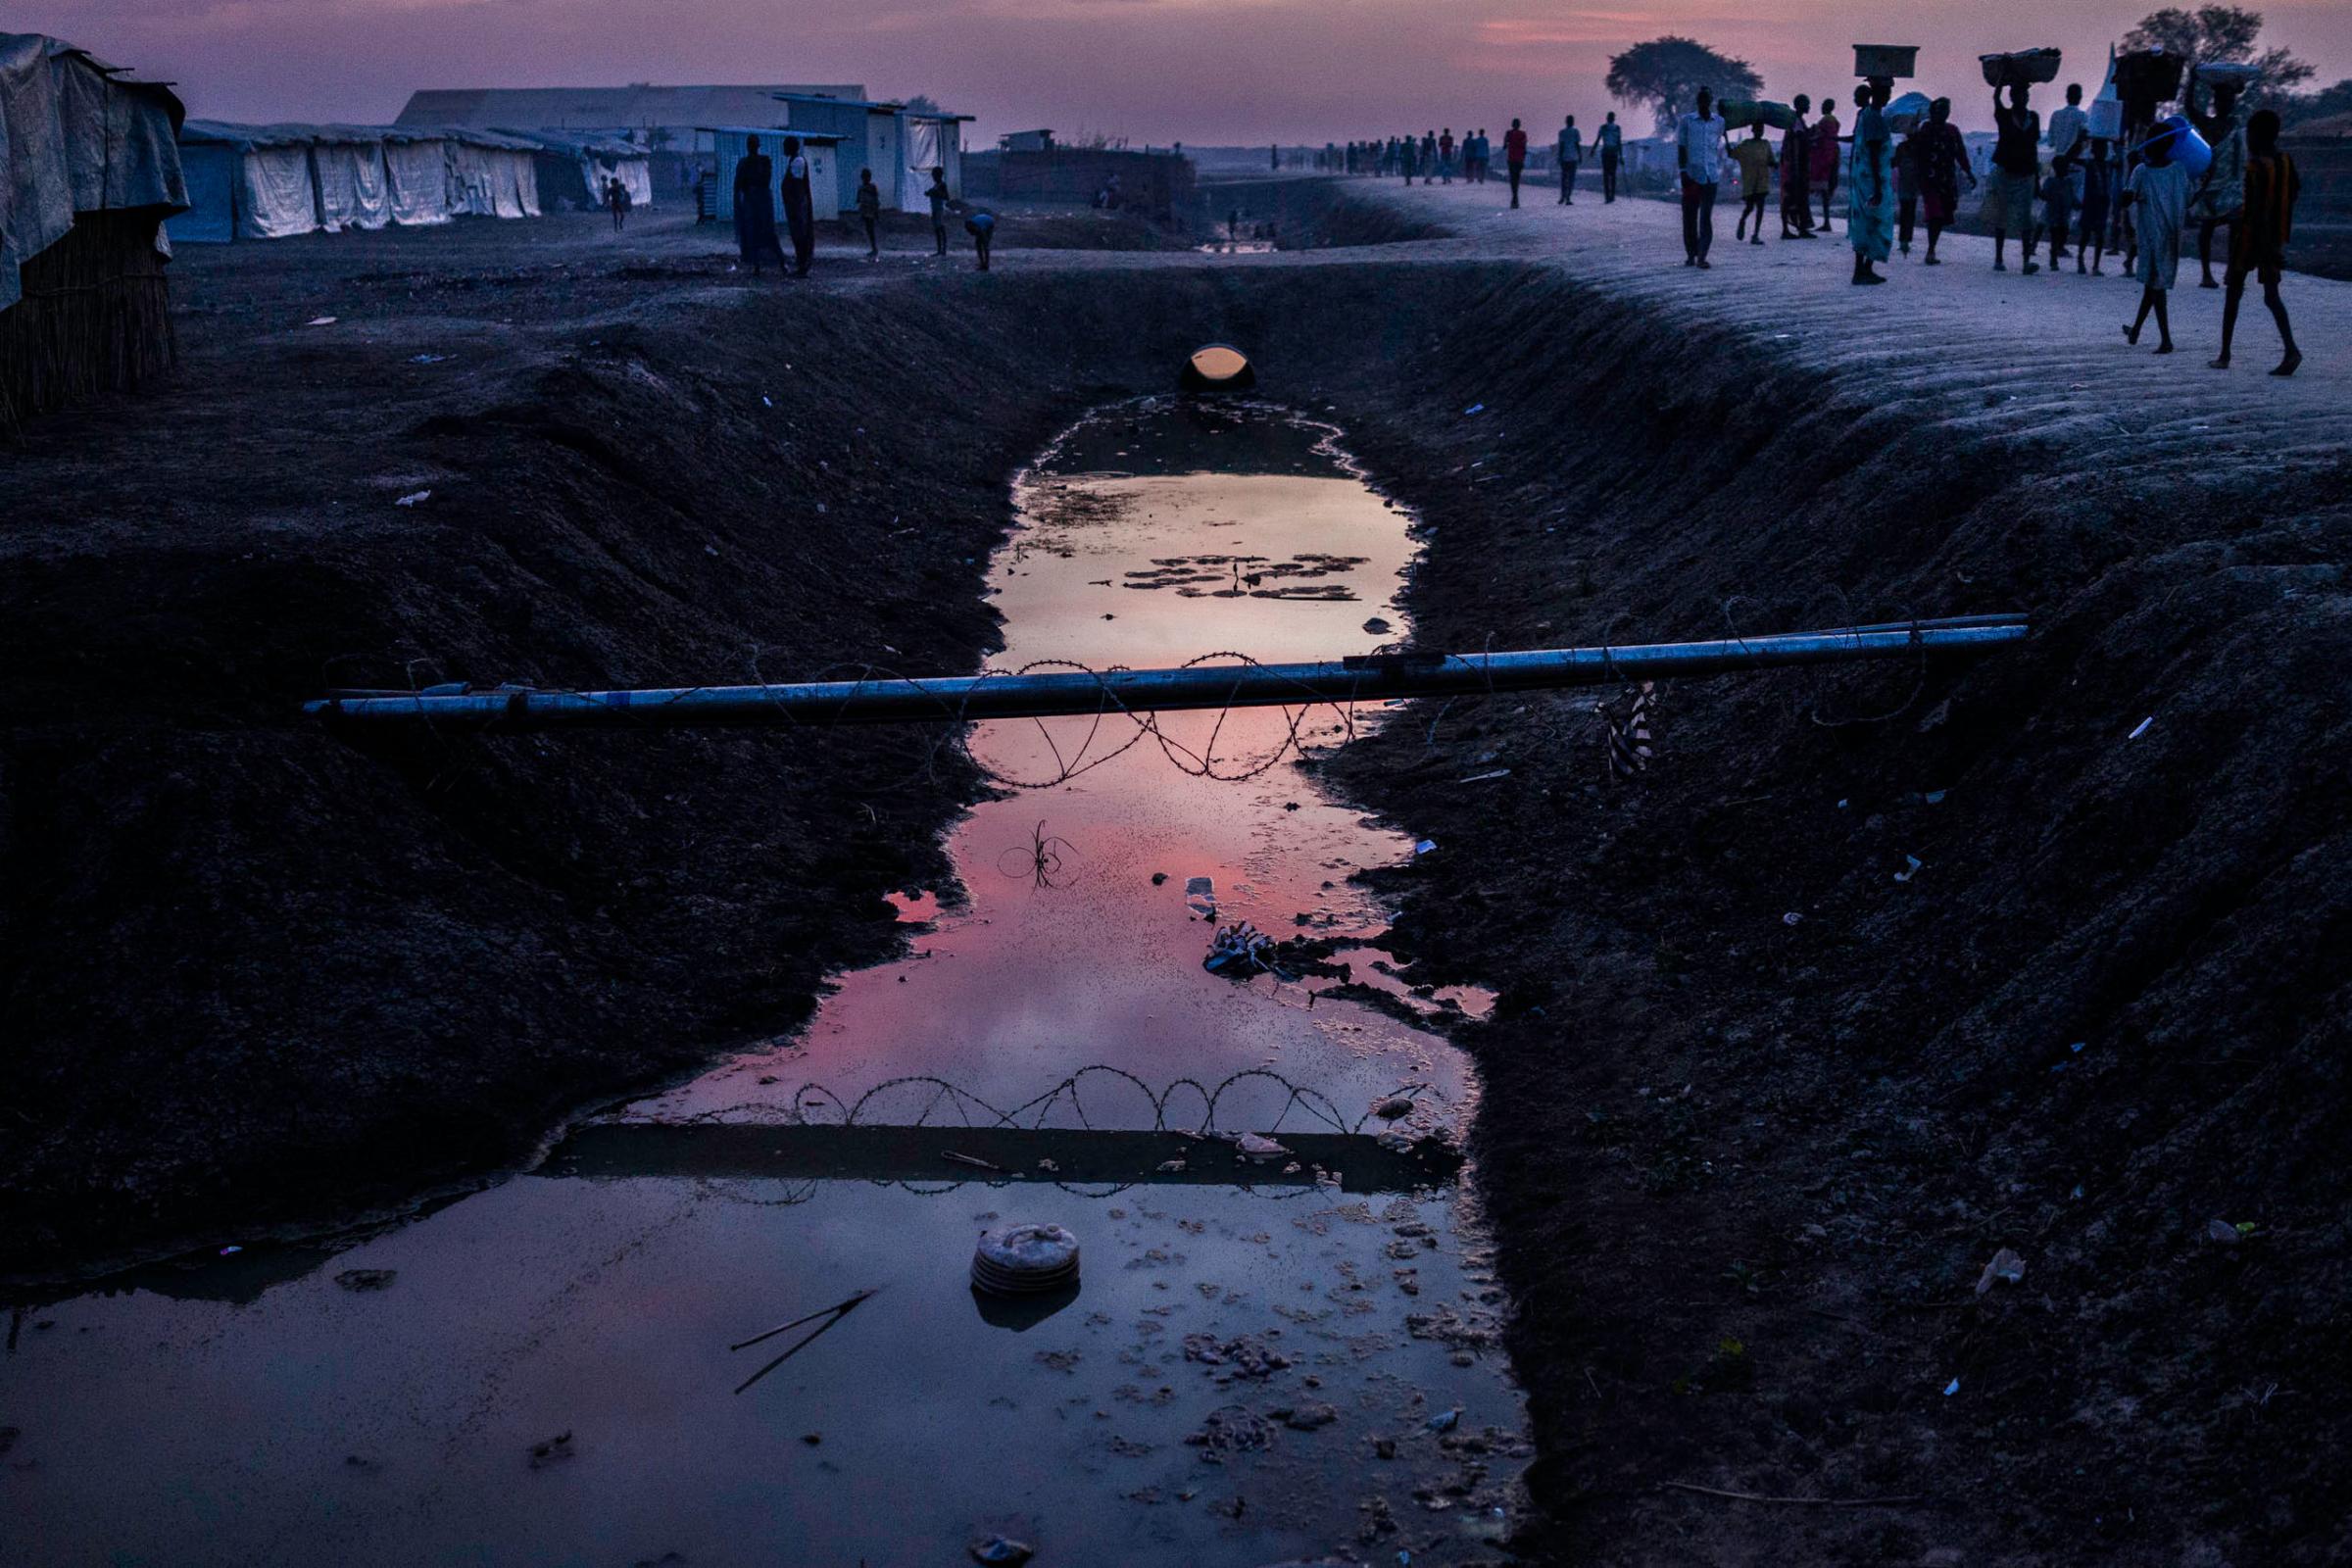 People walk past a drainage ditch in the United Nations camp in Bentiu, Unity State, South Sudan.